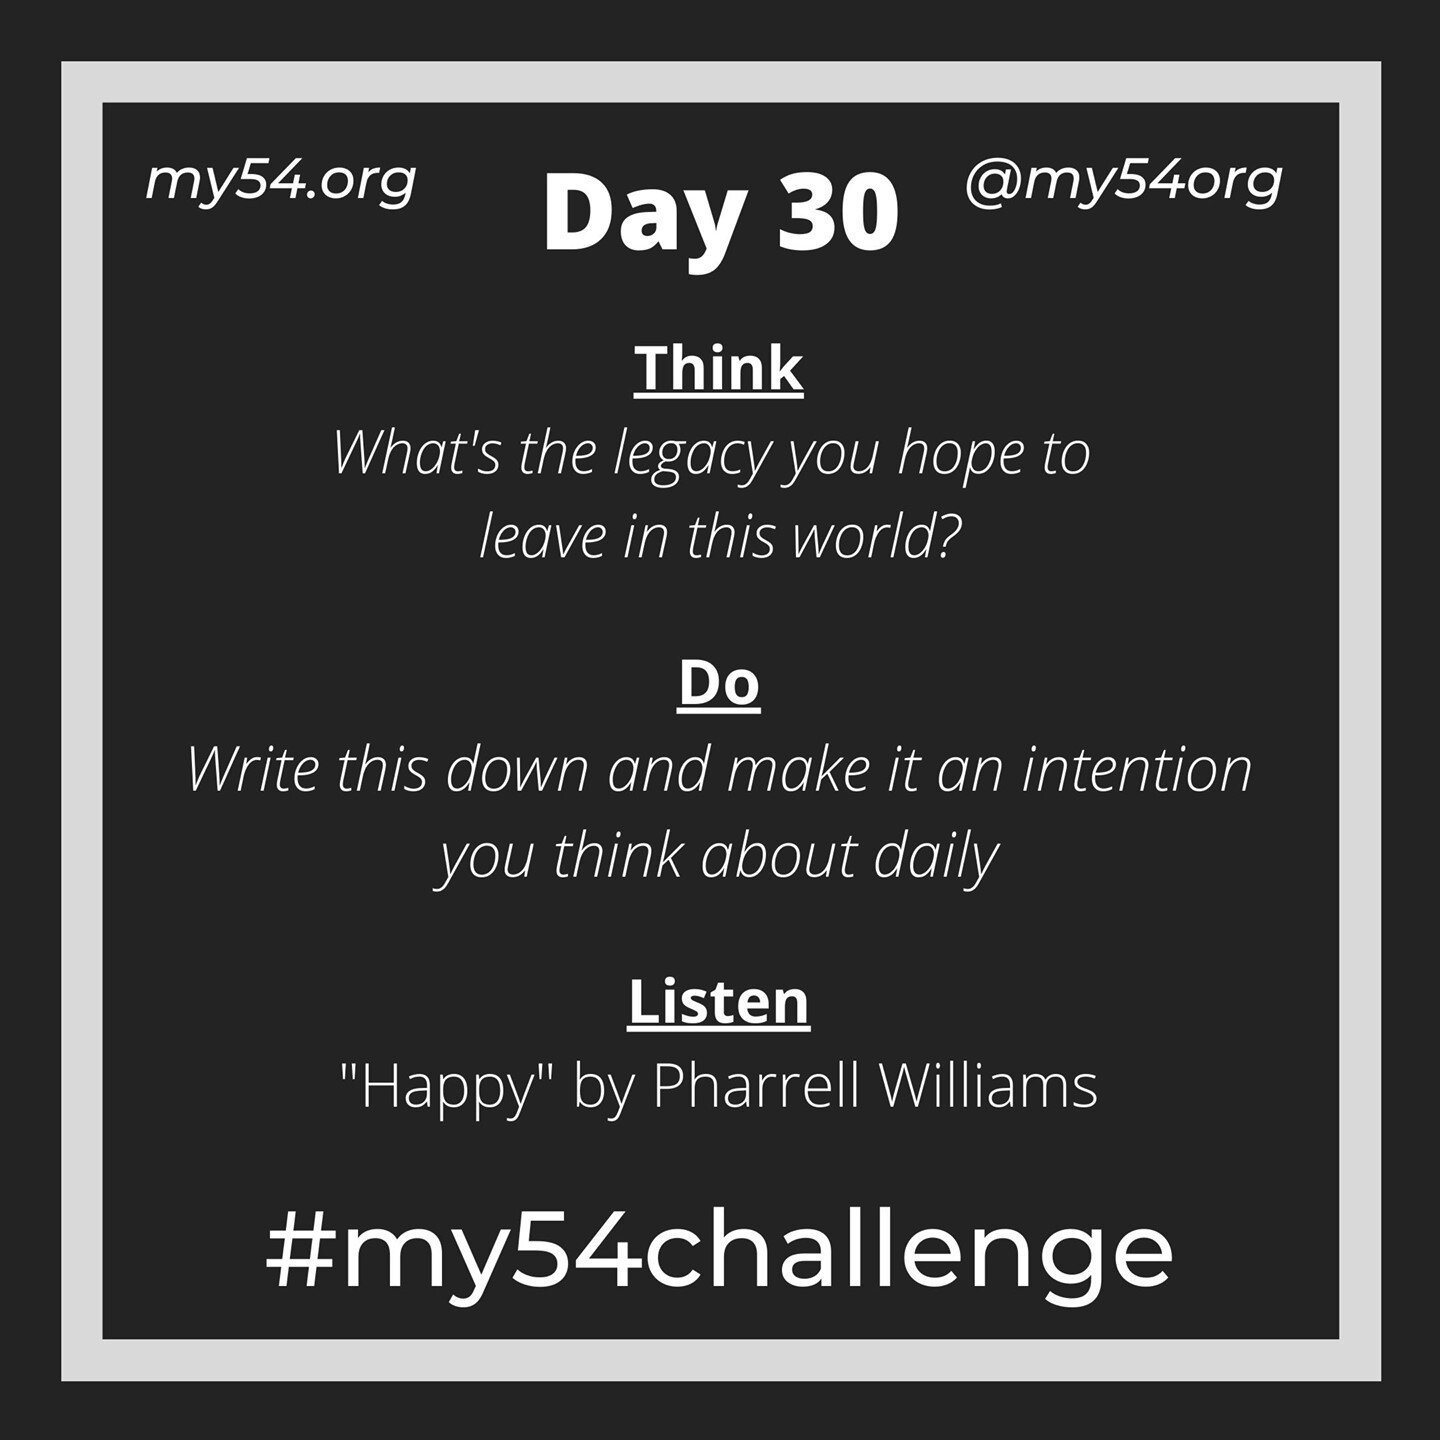 Day 30: Congrats and thank you for joining us on this intentional journey to understand what is important to you and how you can make a difference! End on a high note - while you may not walk the Pettus Bridge, find a way to make it meaningful! #my54